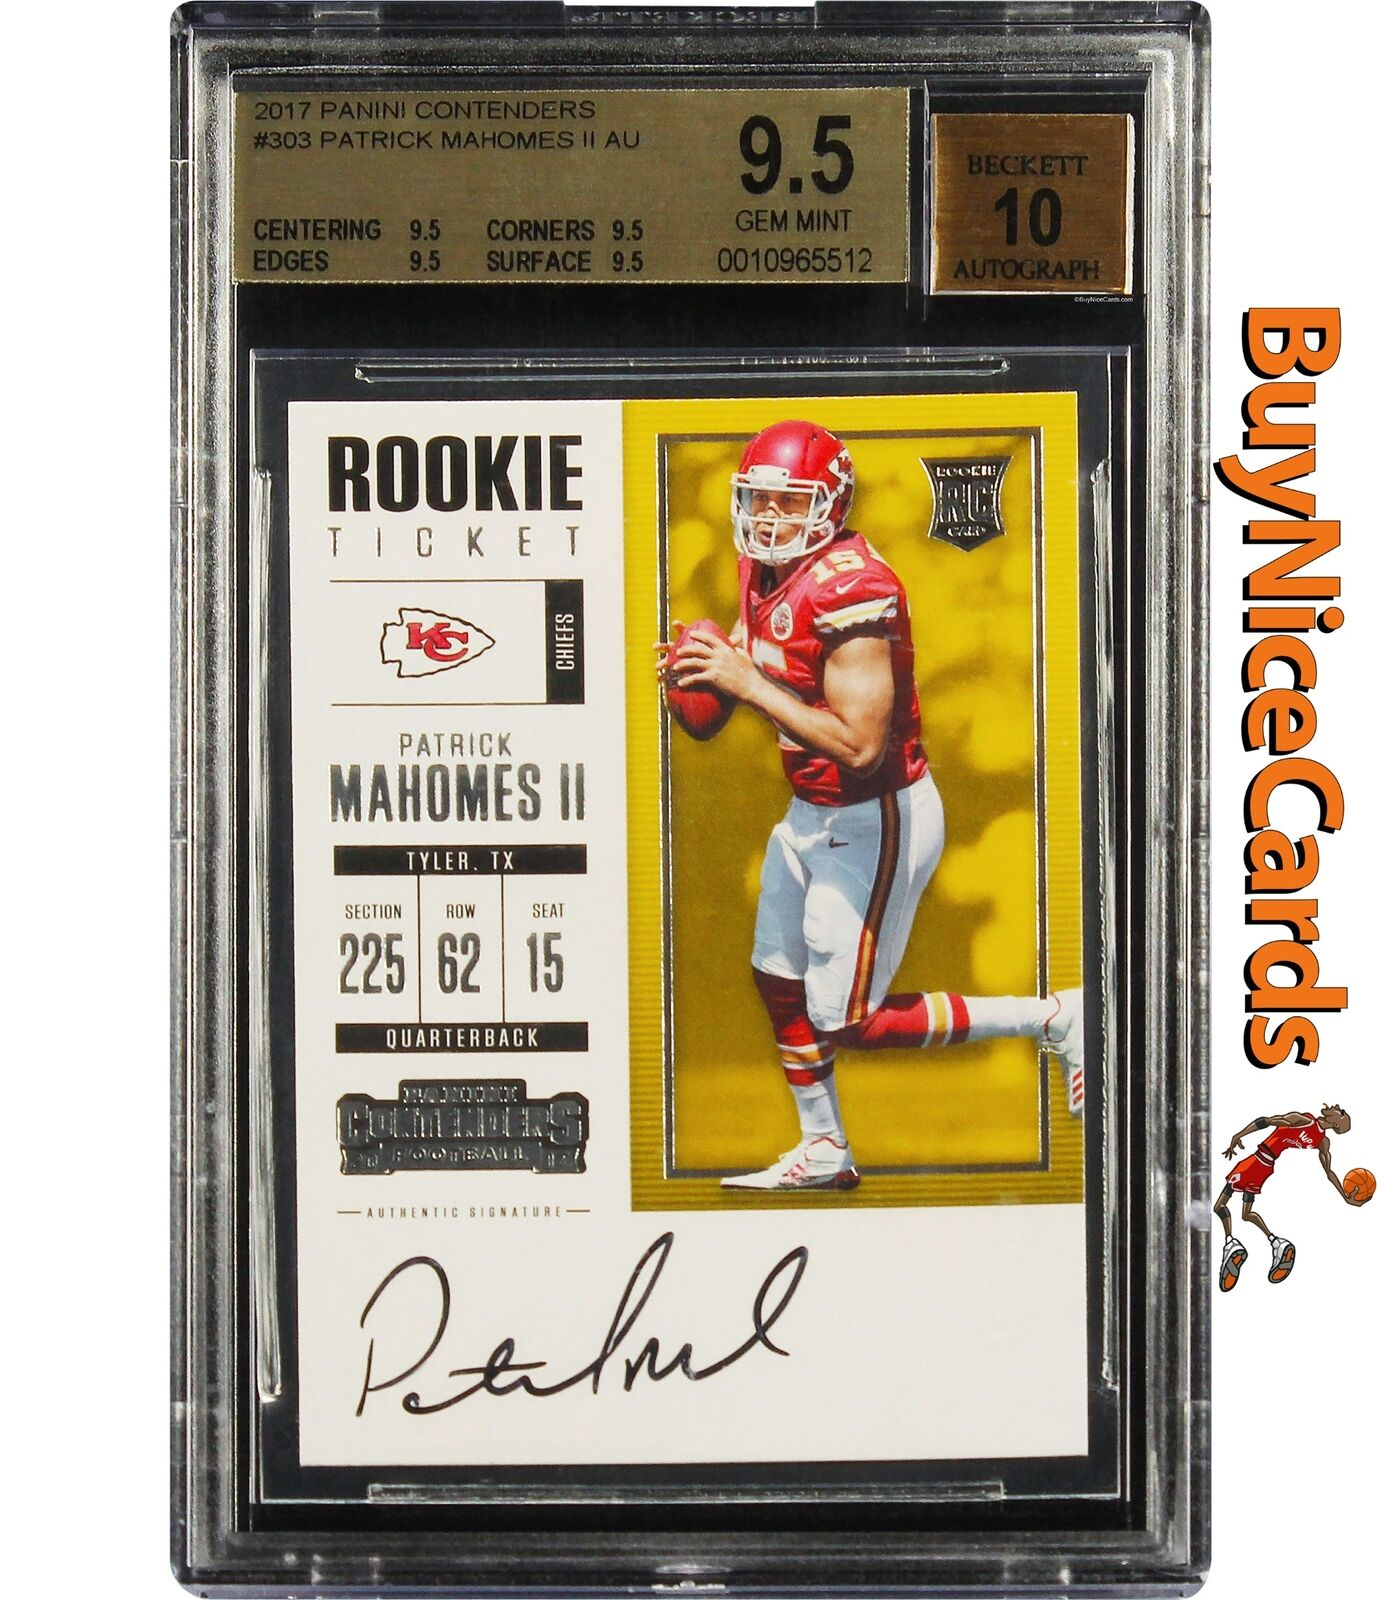 Most valuable Patrick Mahomes rookie cards: 2017 Panini #303